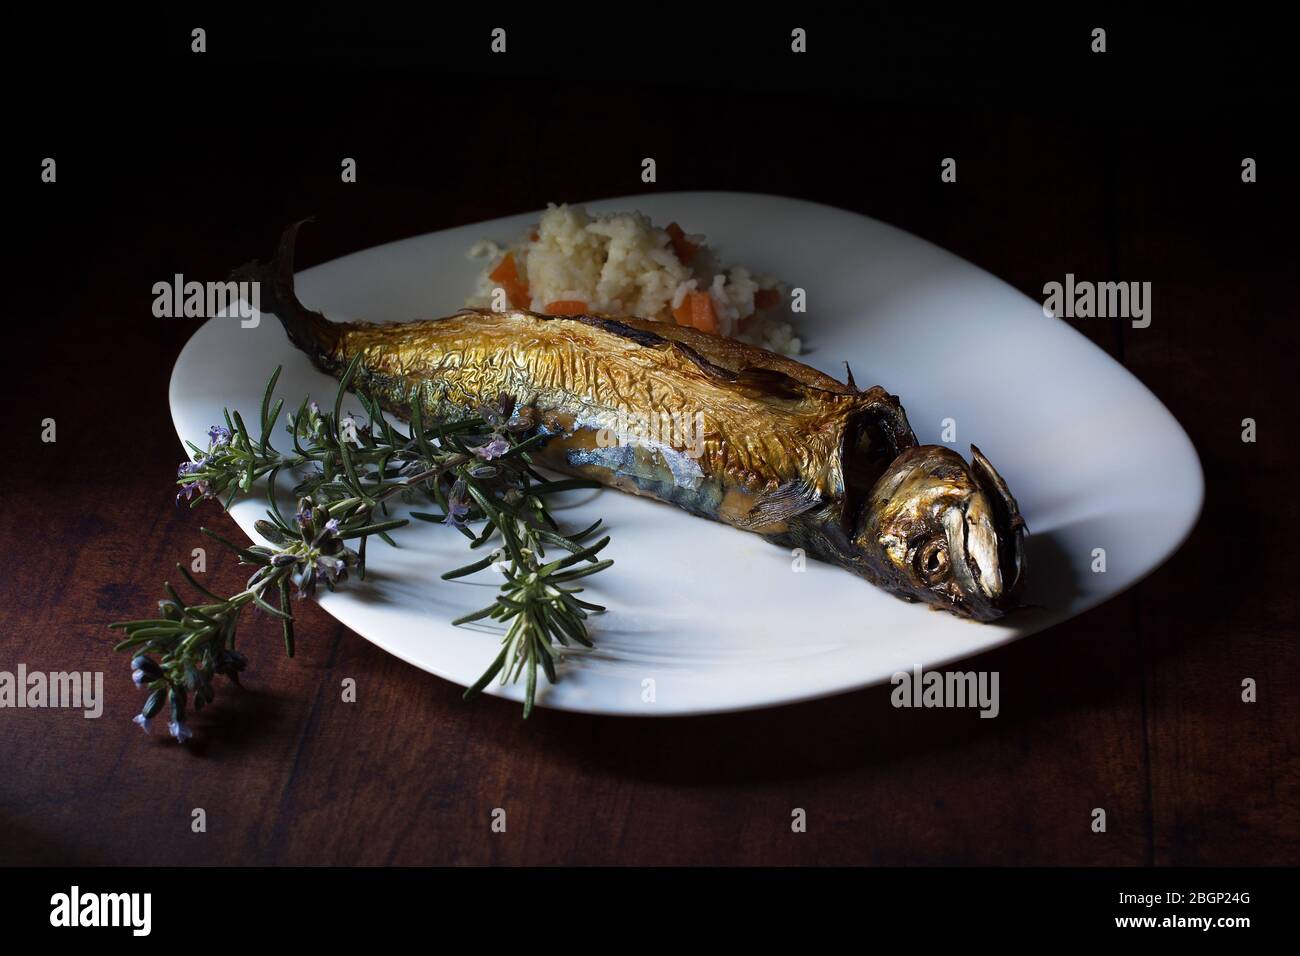 Oven-roasted mackerel, served on a white plate, a small portion of cooked rice with carrot pieces, and a few flowering rosemary twigs as a decoration. Stock Photo